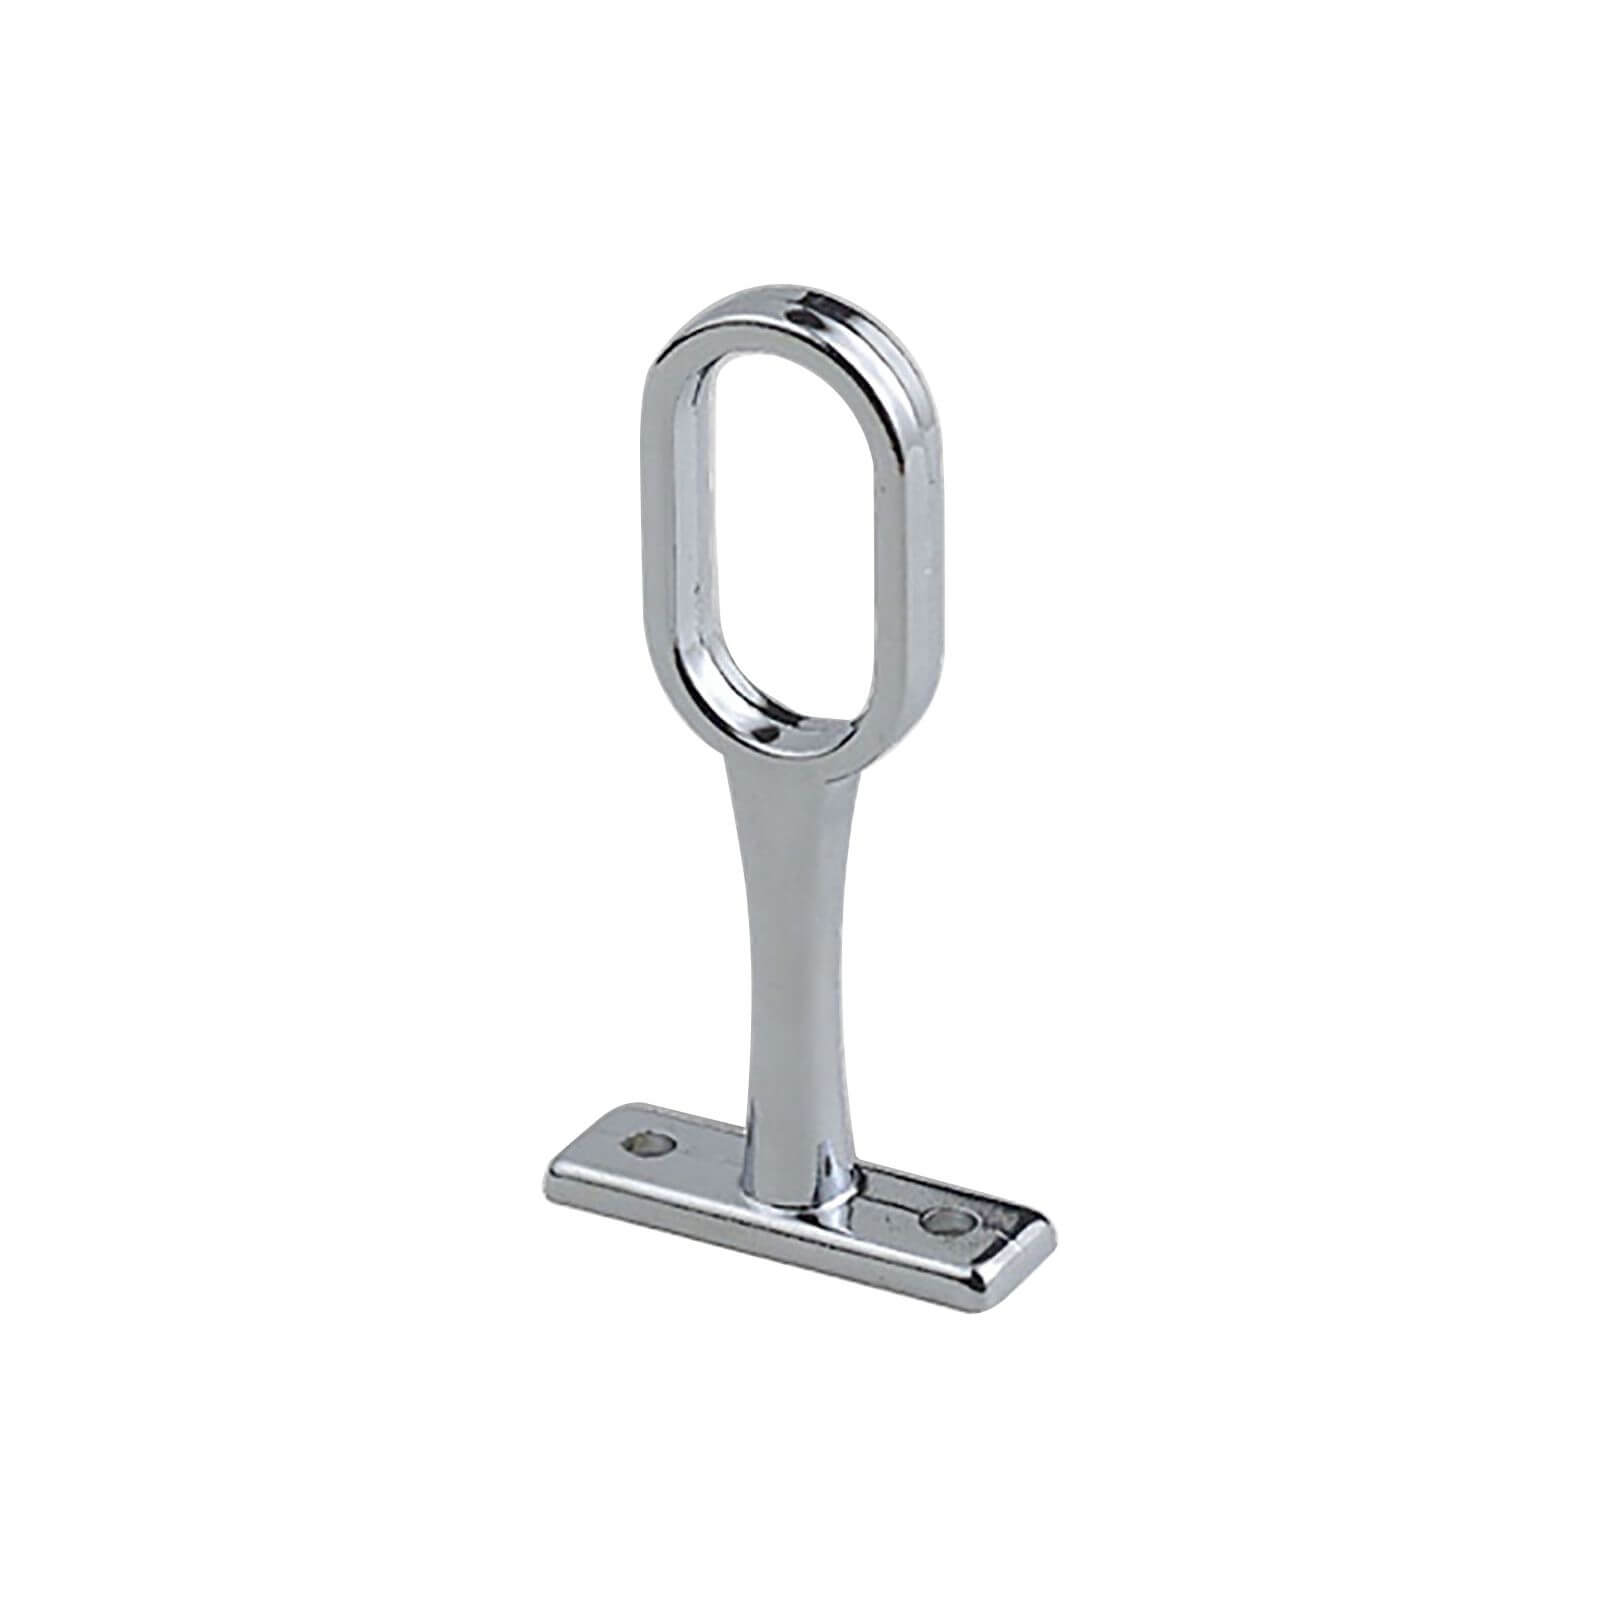 Photo of Oval Support Bracket Chrome Plated